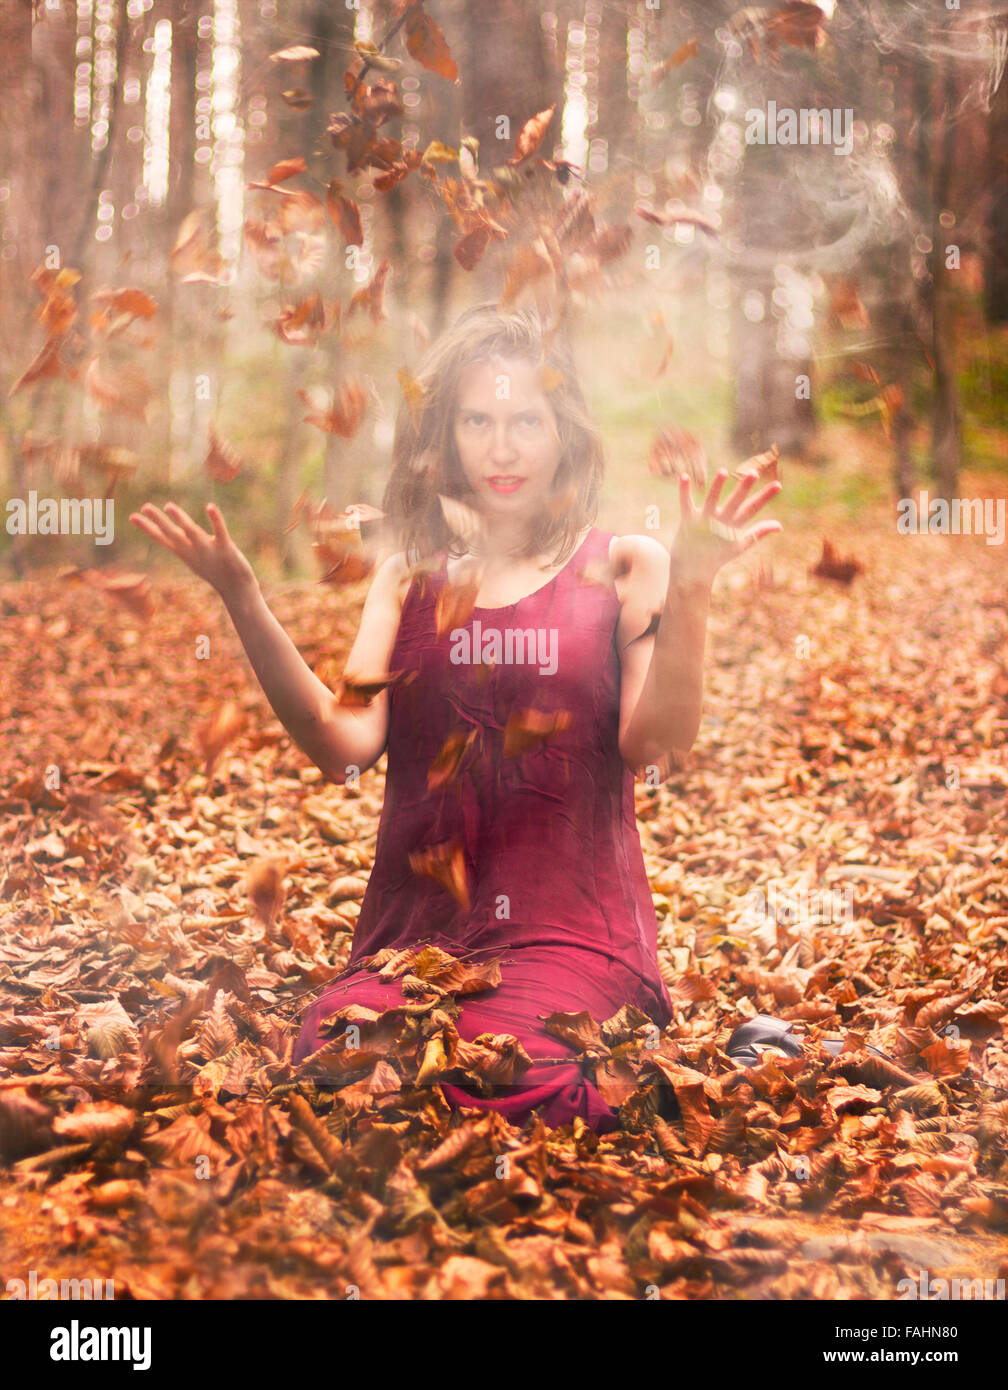 Women in burgundy dress throwing leaves up in the air, surrounded by smoke Stock Photo